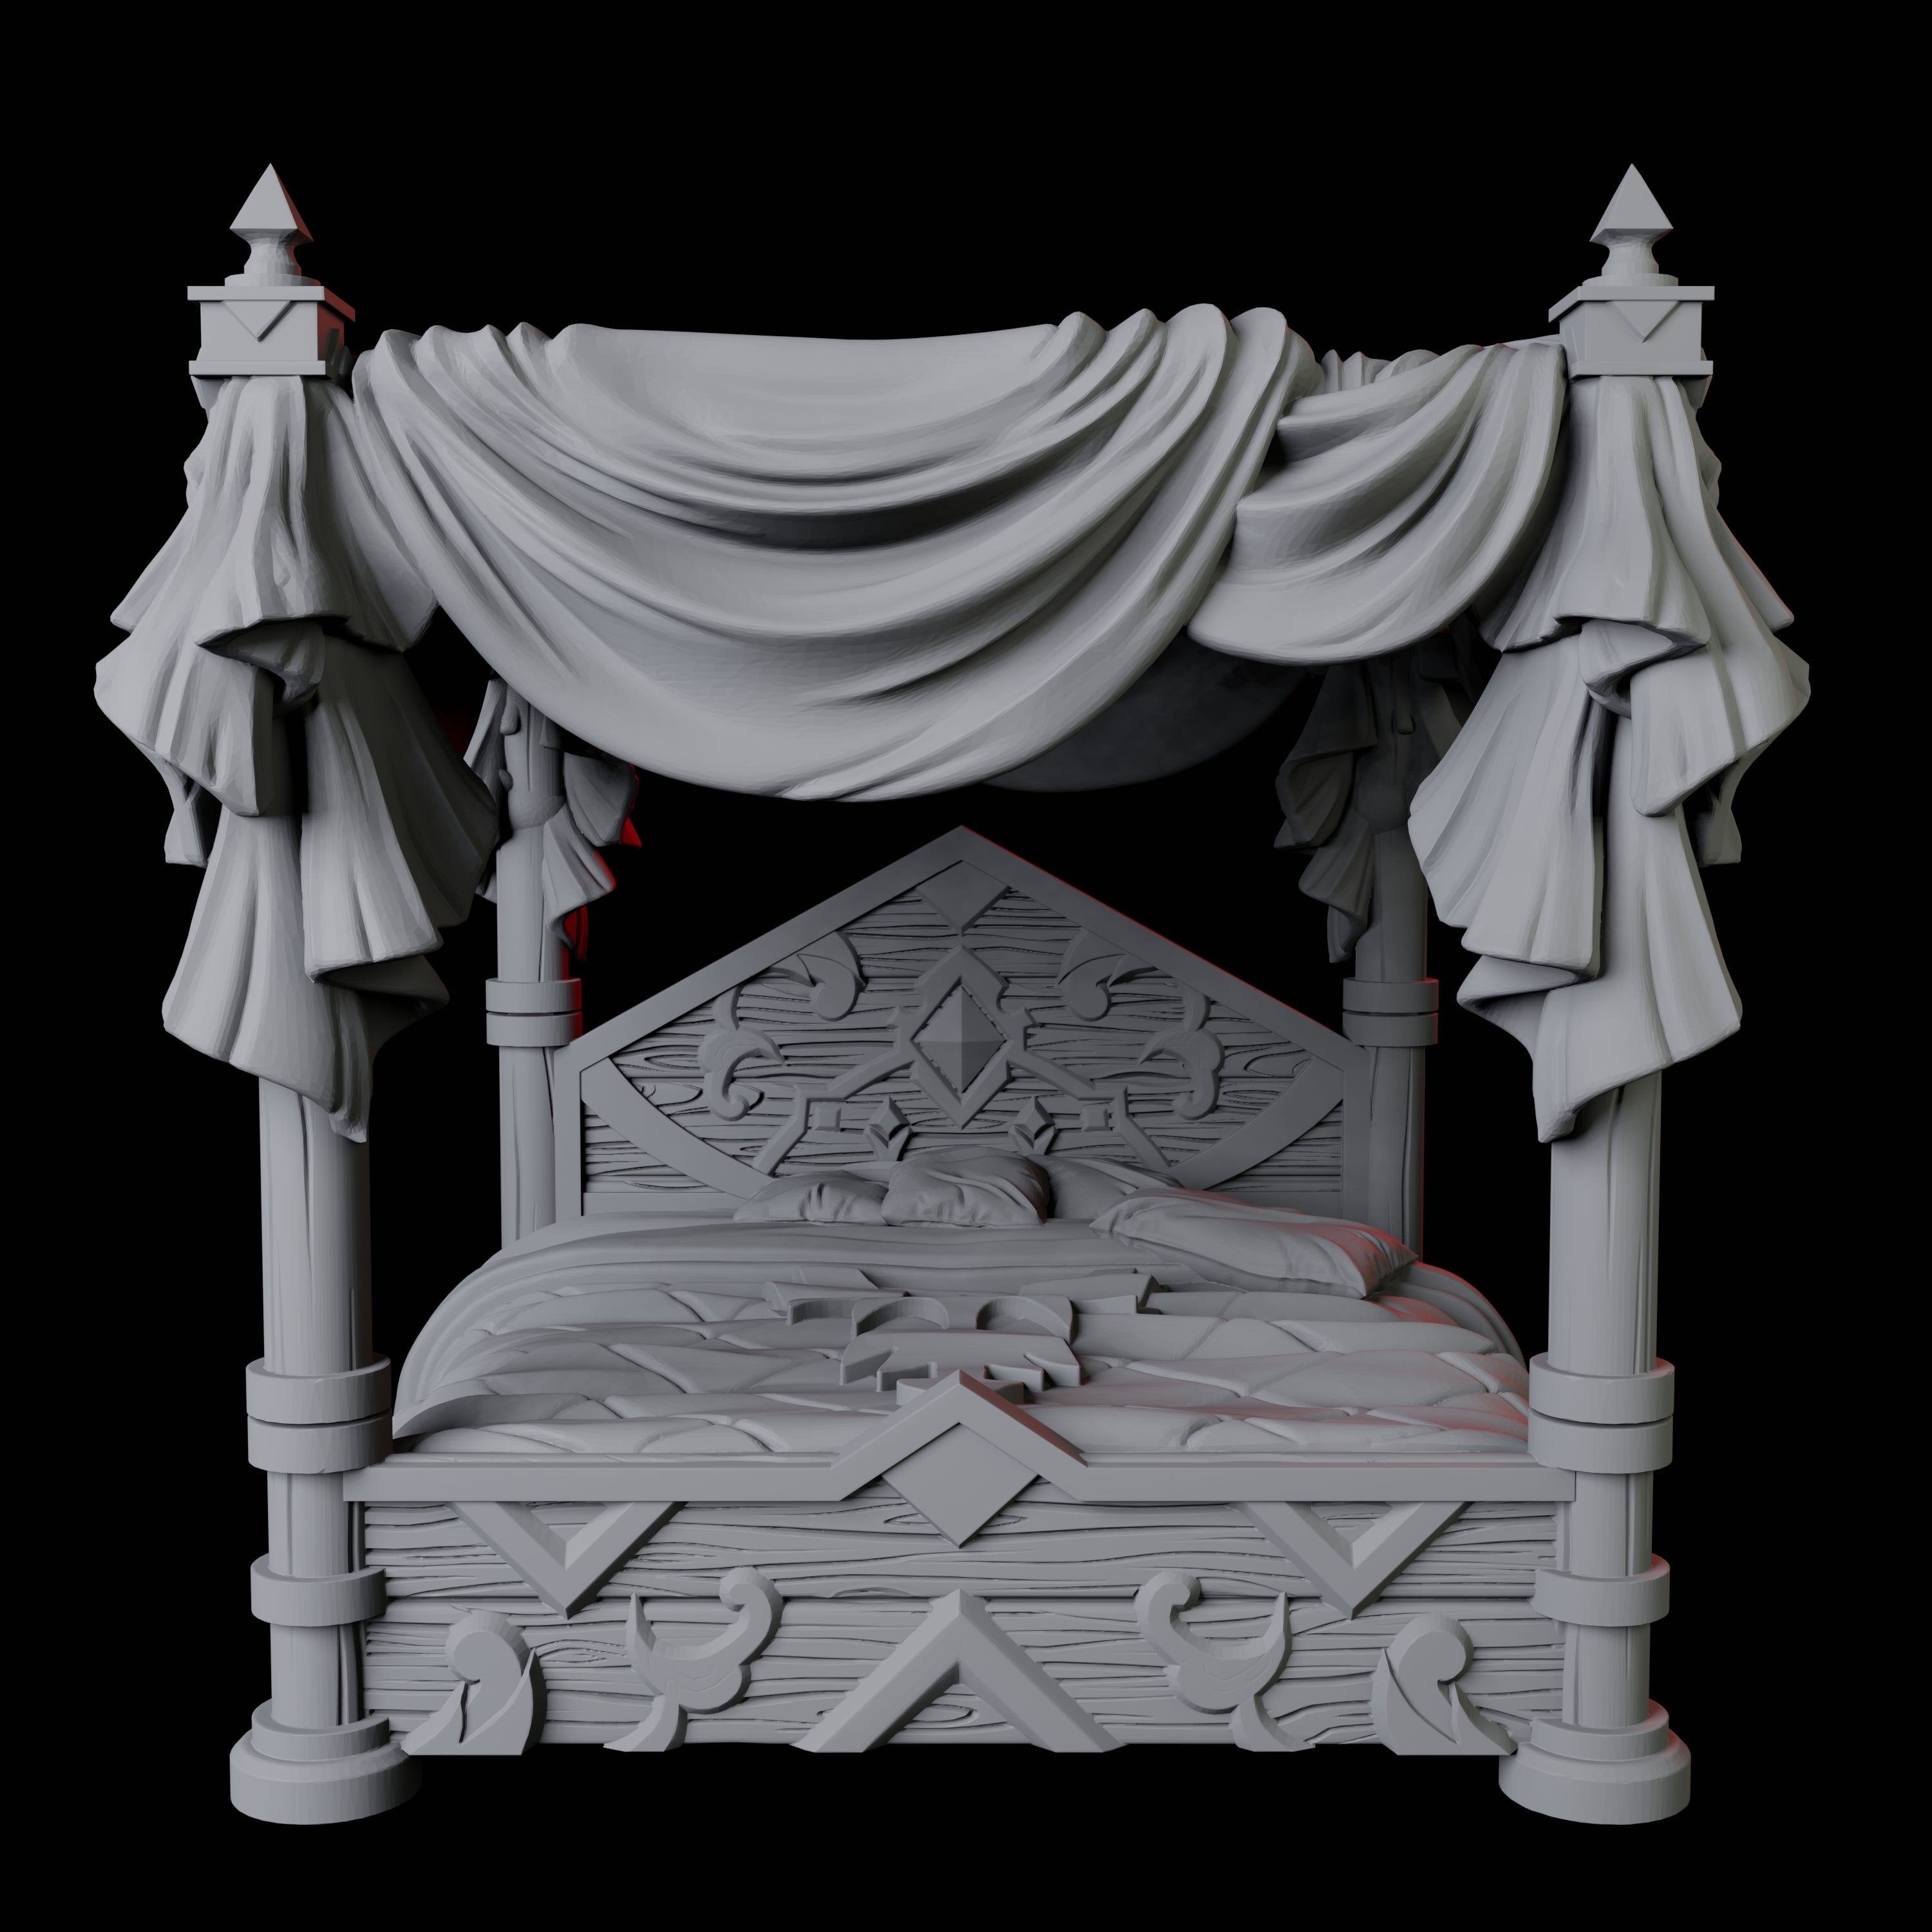 Four Poster Bed Miniature for Dungeons and Dragons, Pathfinder or other TTRPGs